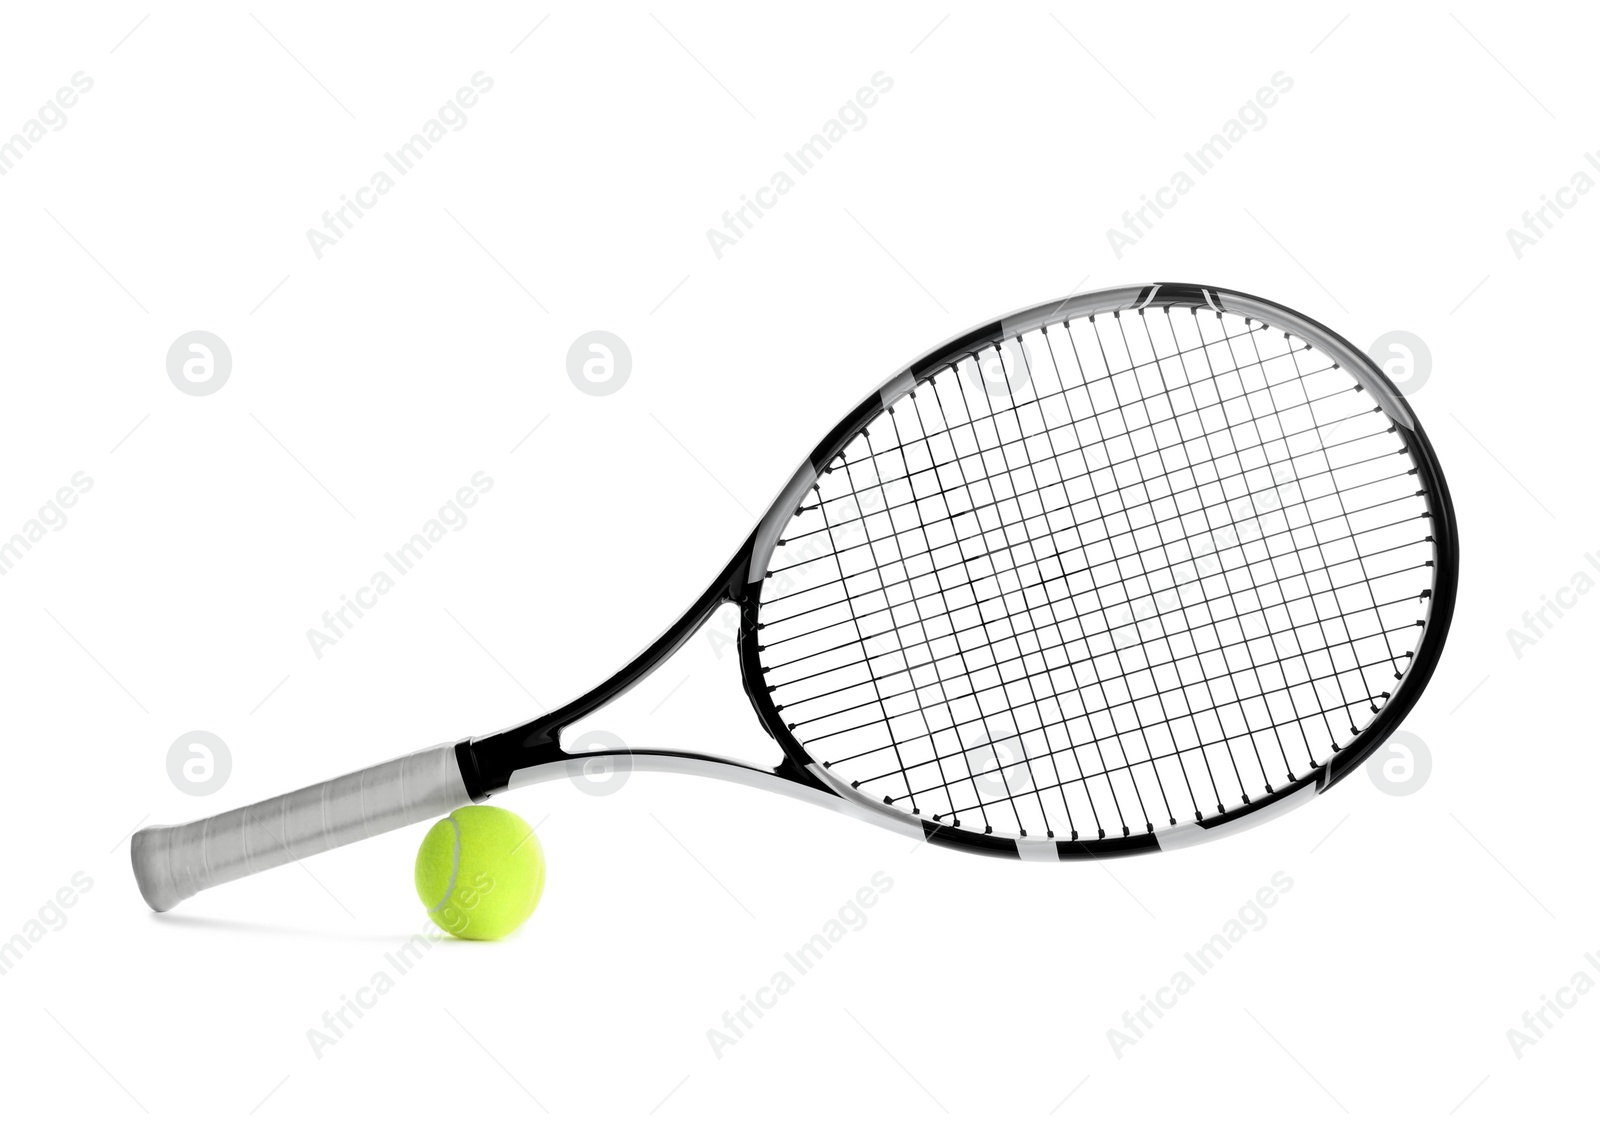 Photo of Tennis racket and ball on white background. Sports equipment